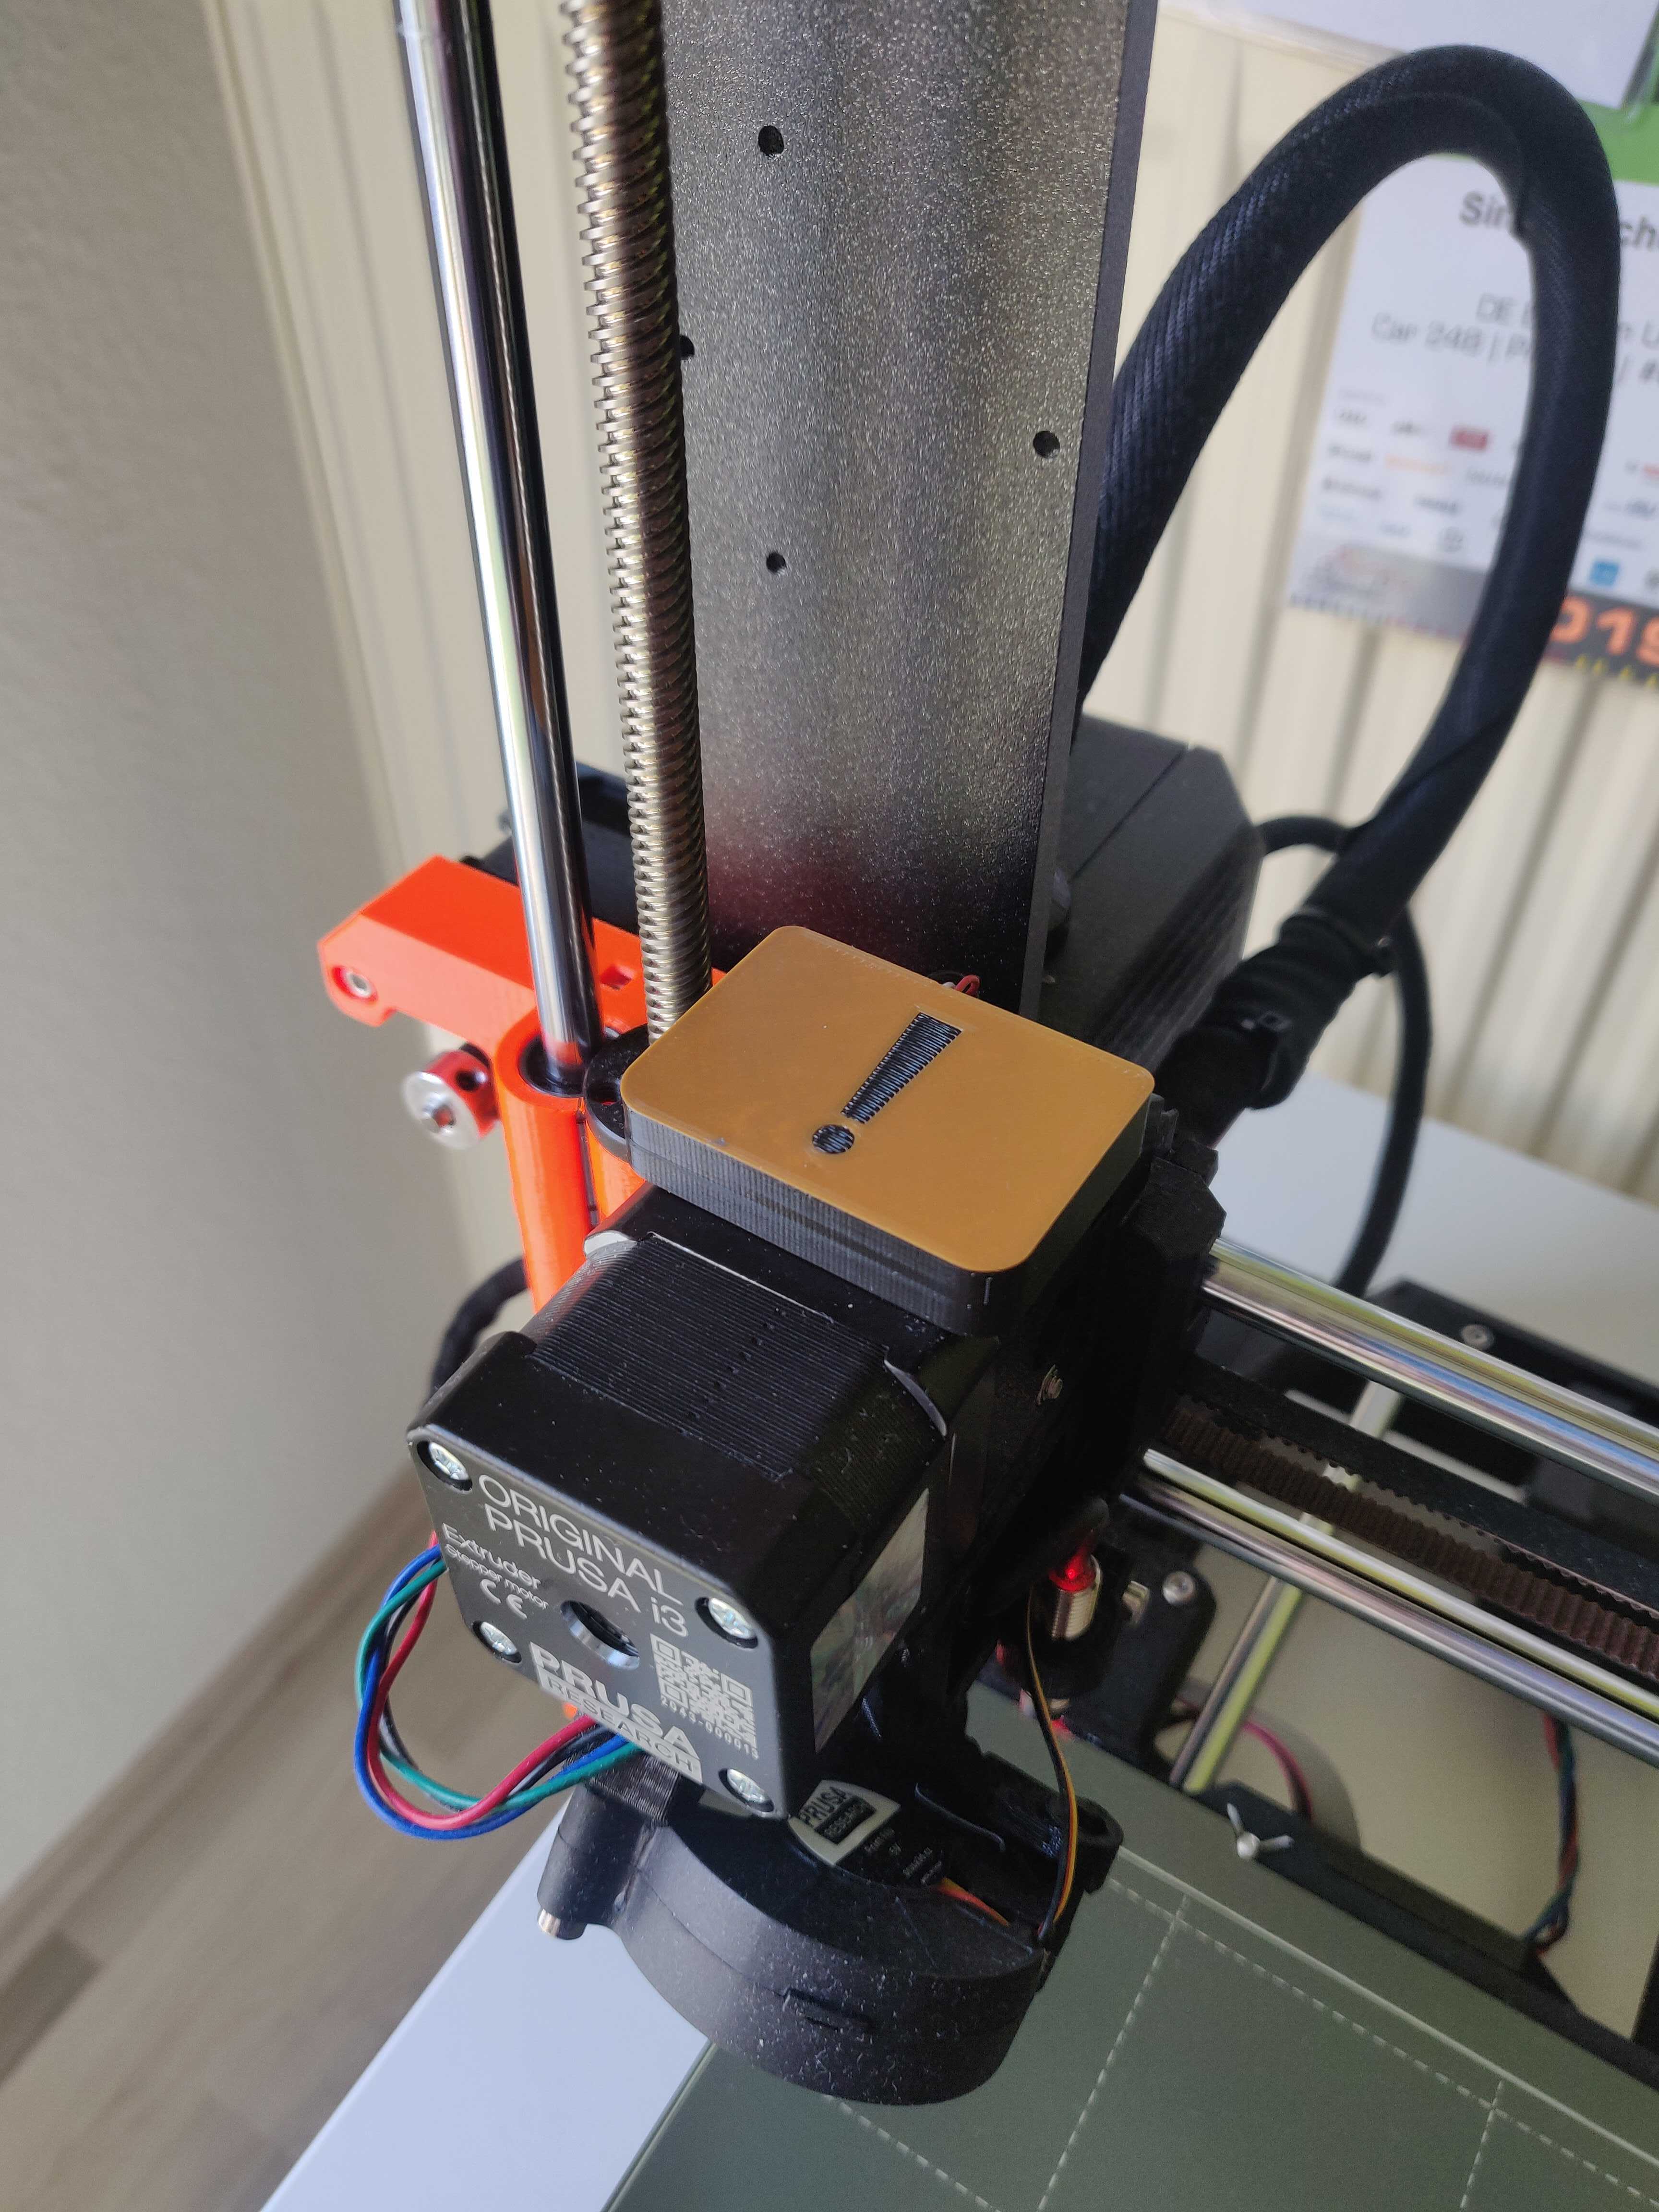 Prusa i3 MK3S+ Extruder Inlet Dust Cover